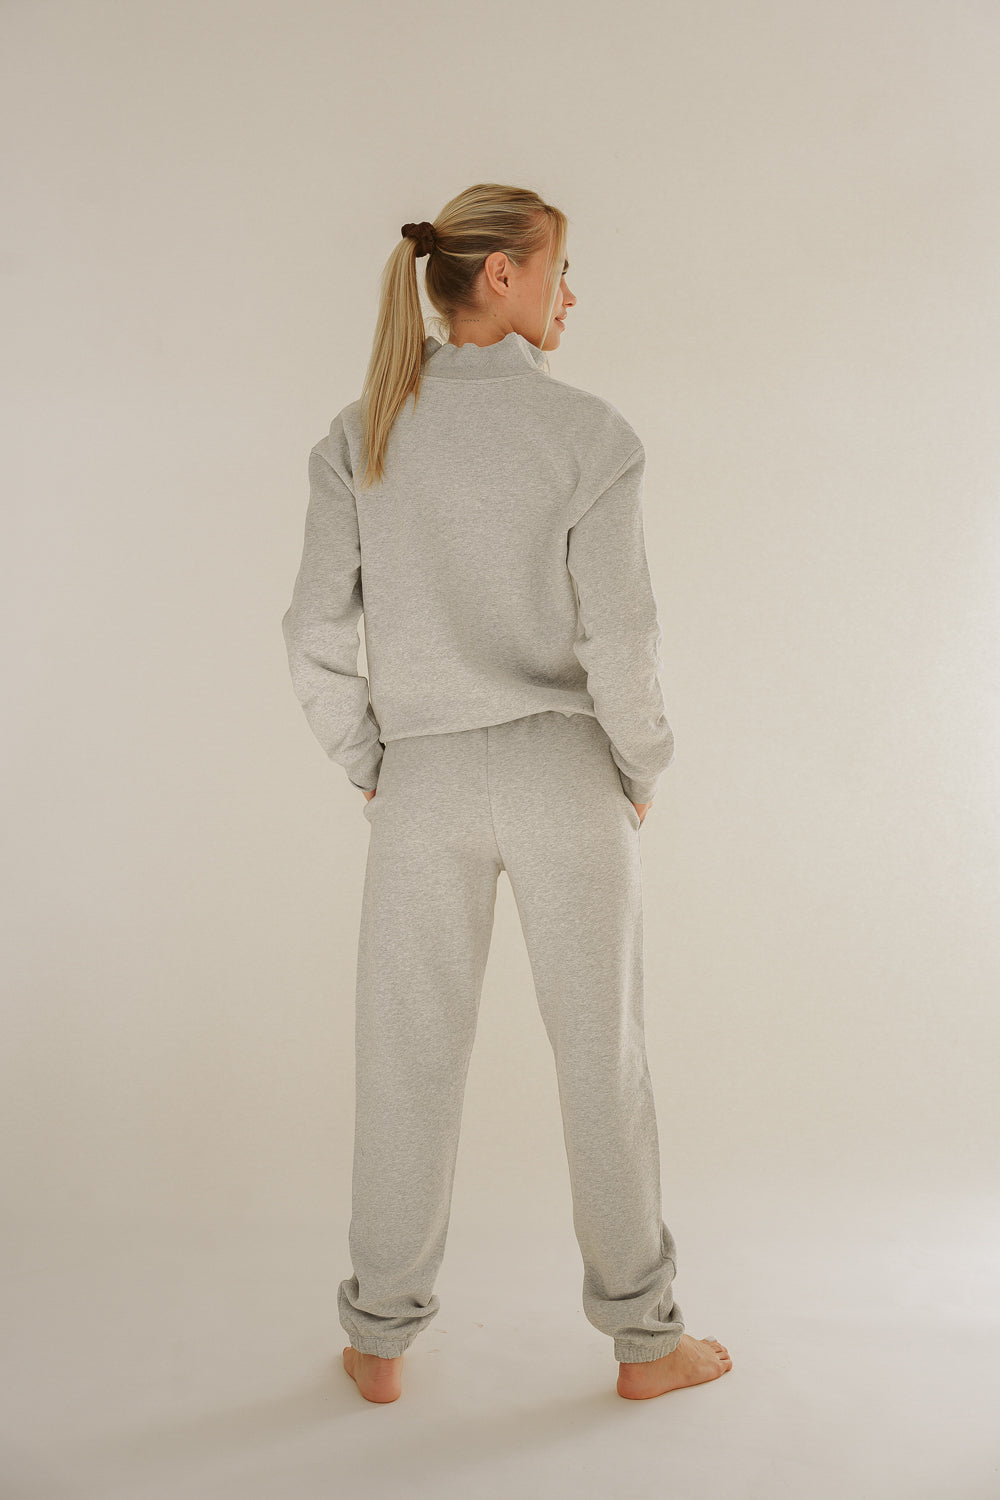 Light grey AAMY jogging pants made from 100% organic cotton by Pura Clothing